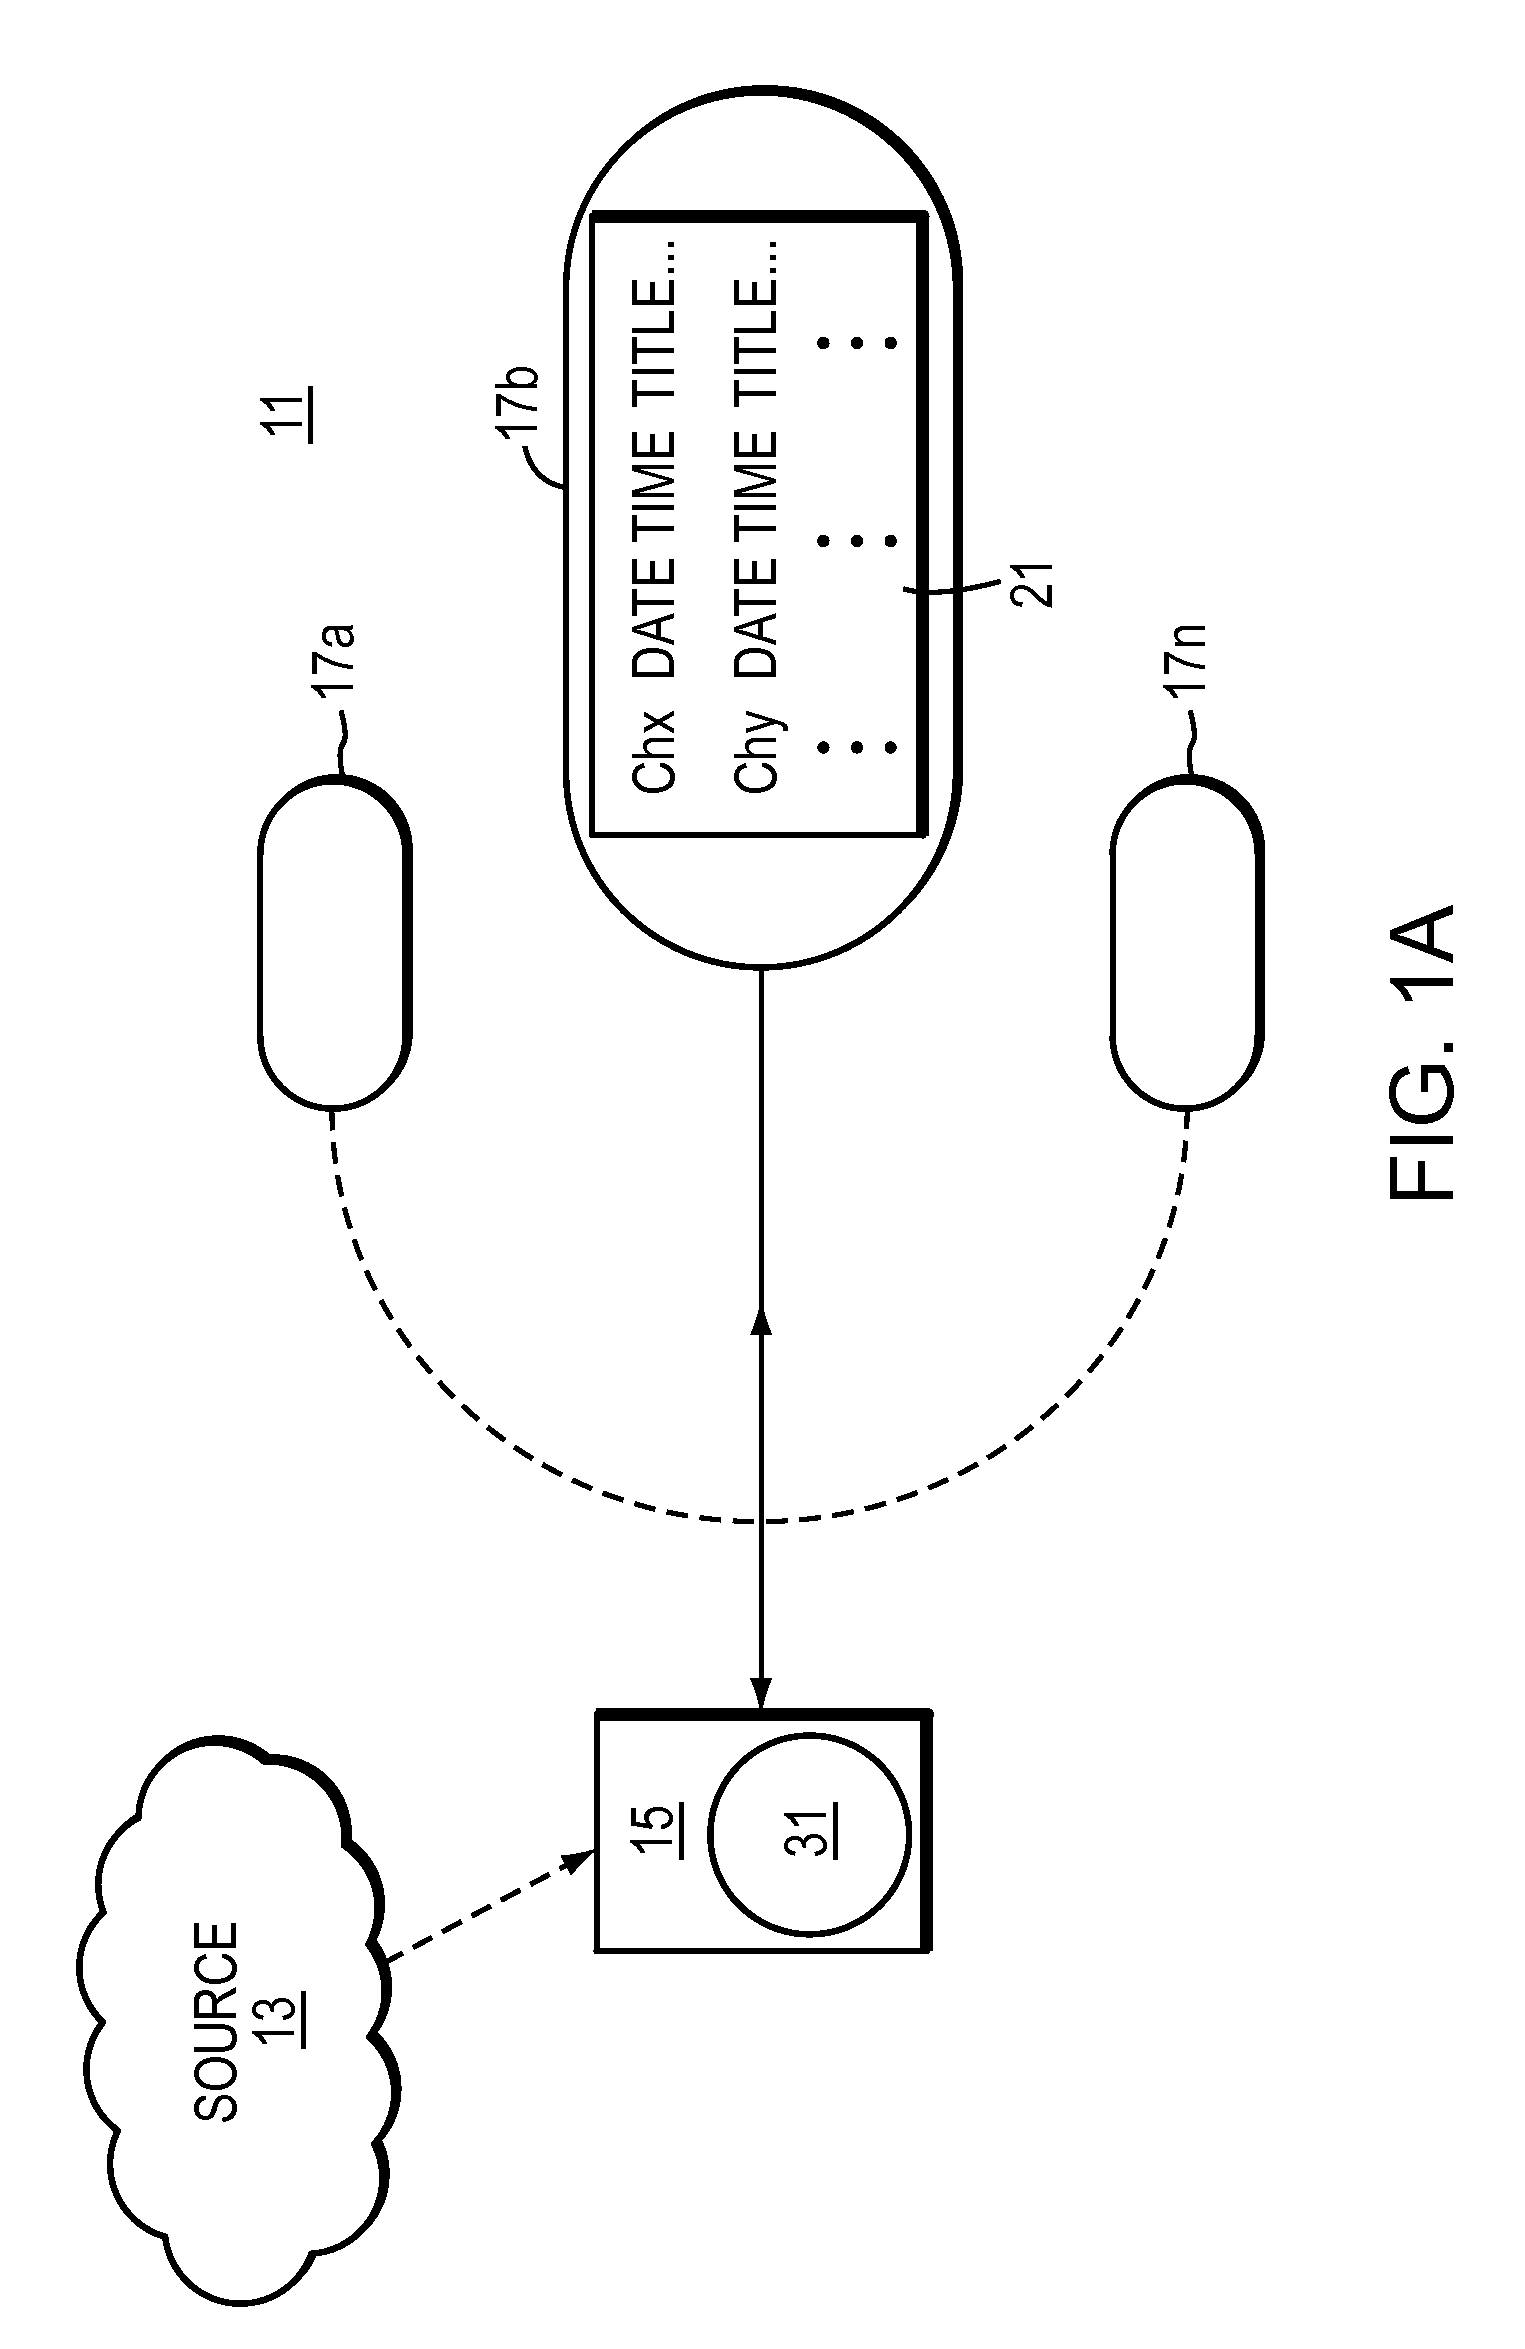 Method and Apparatus for Displaying Interactions With Media by Members of a Social Software System